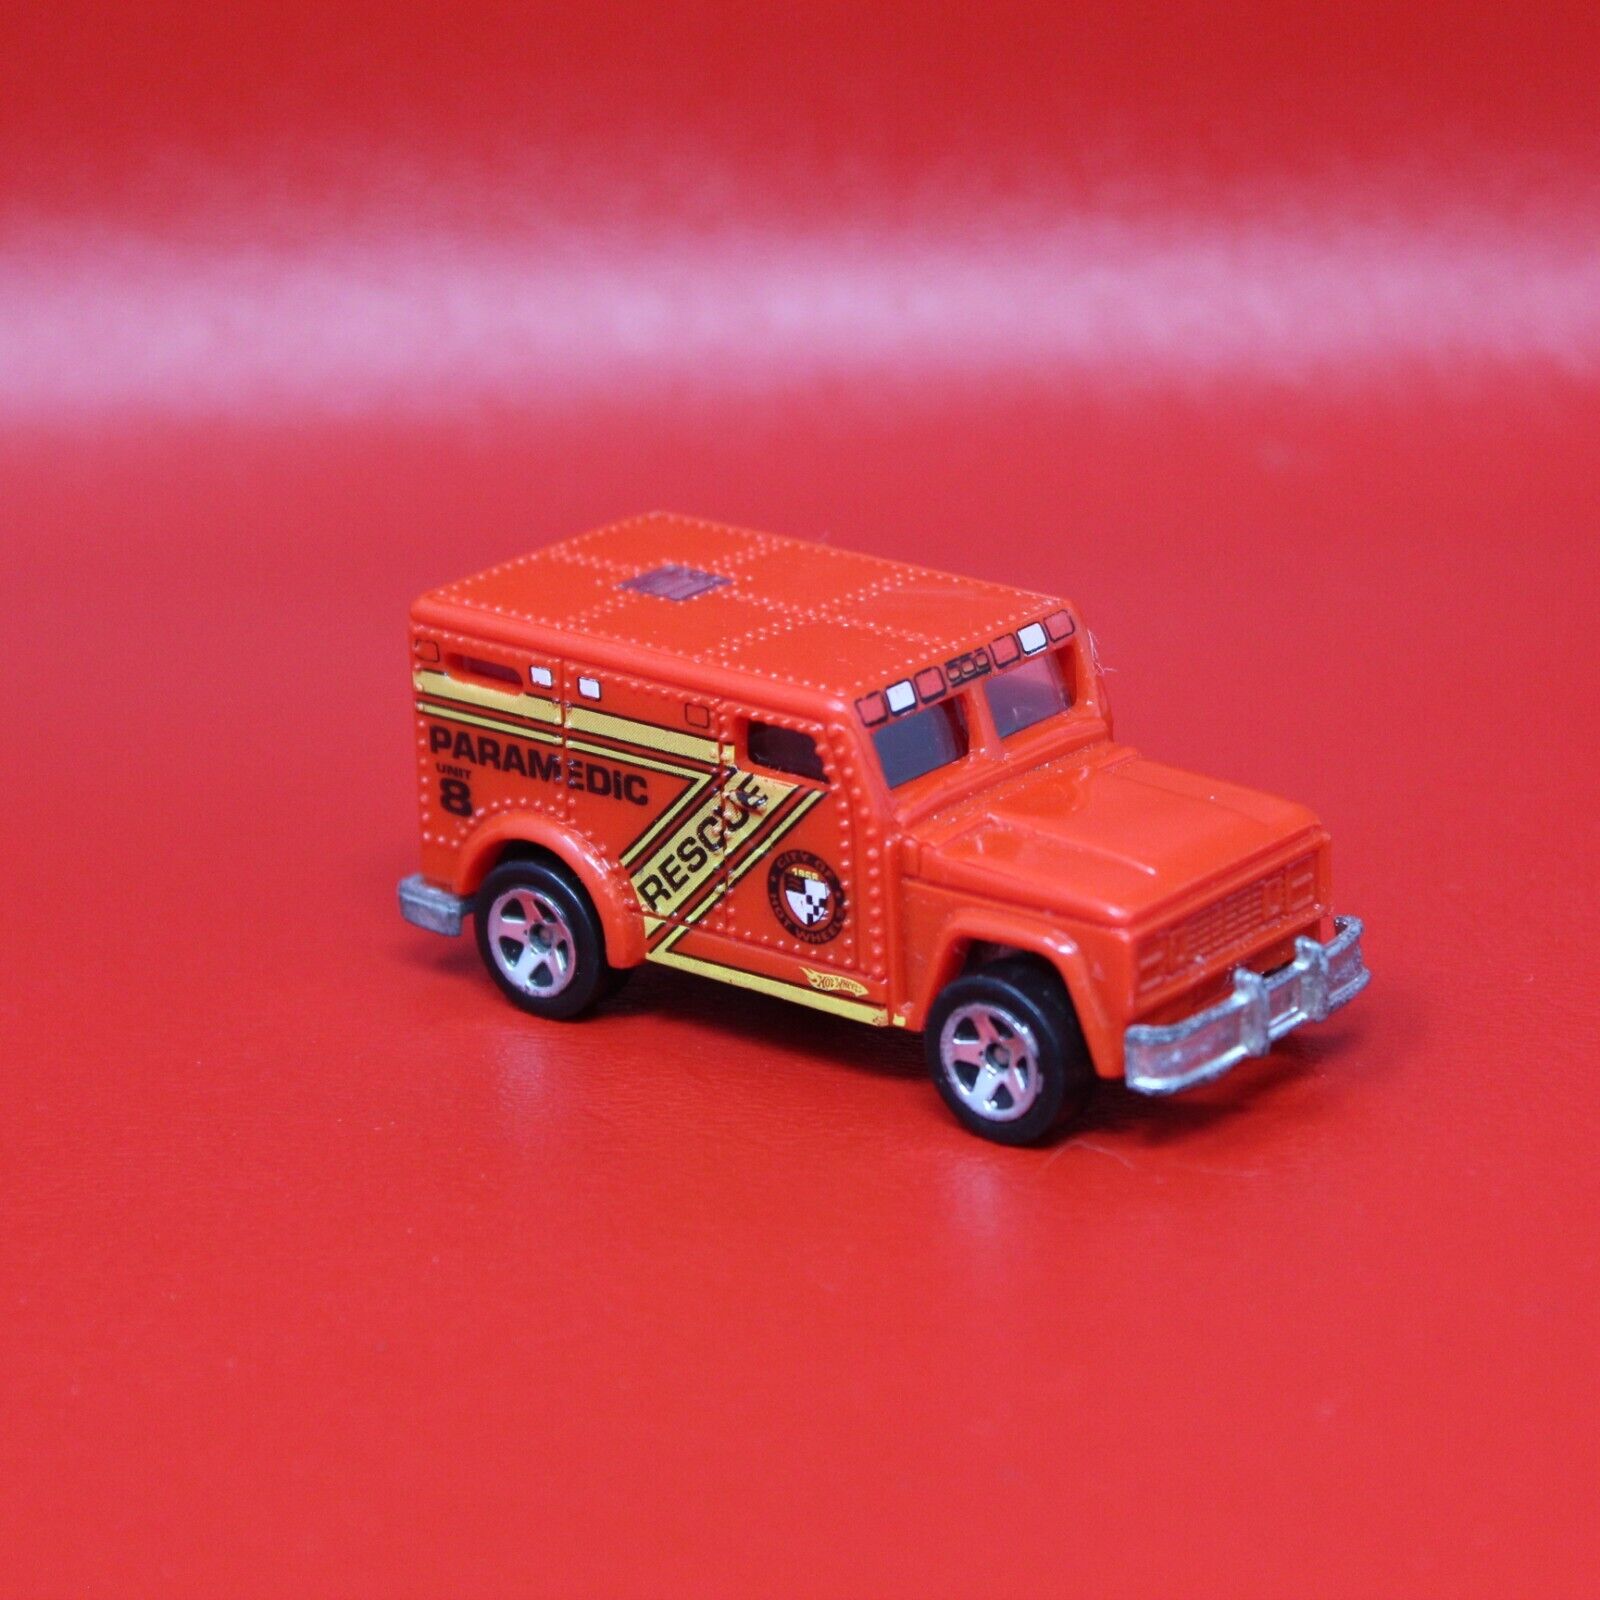 2010 Hot Wheels #184 Armored Truck Red HW Race World: City 1:64 Loose 5sp